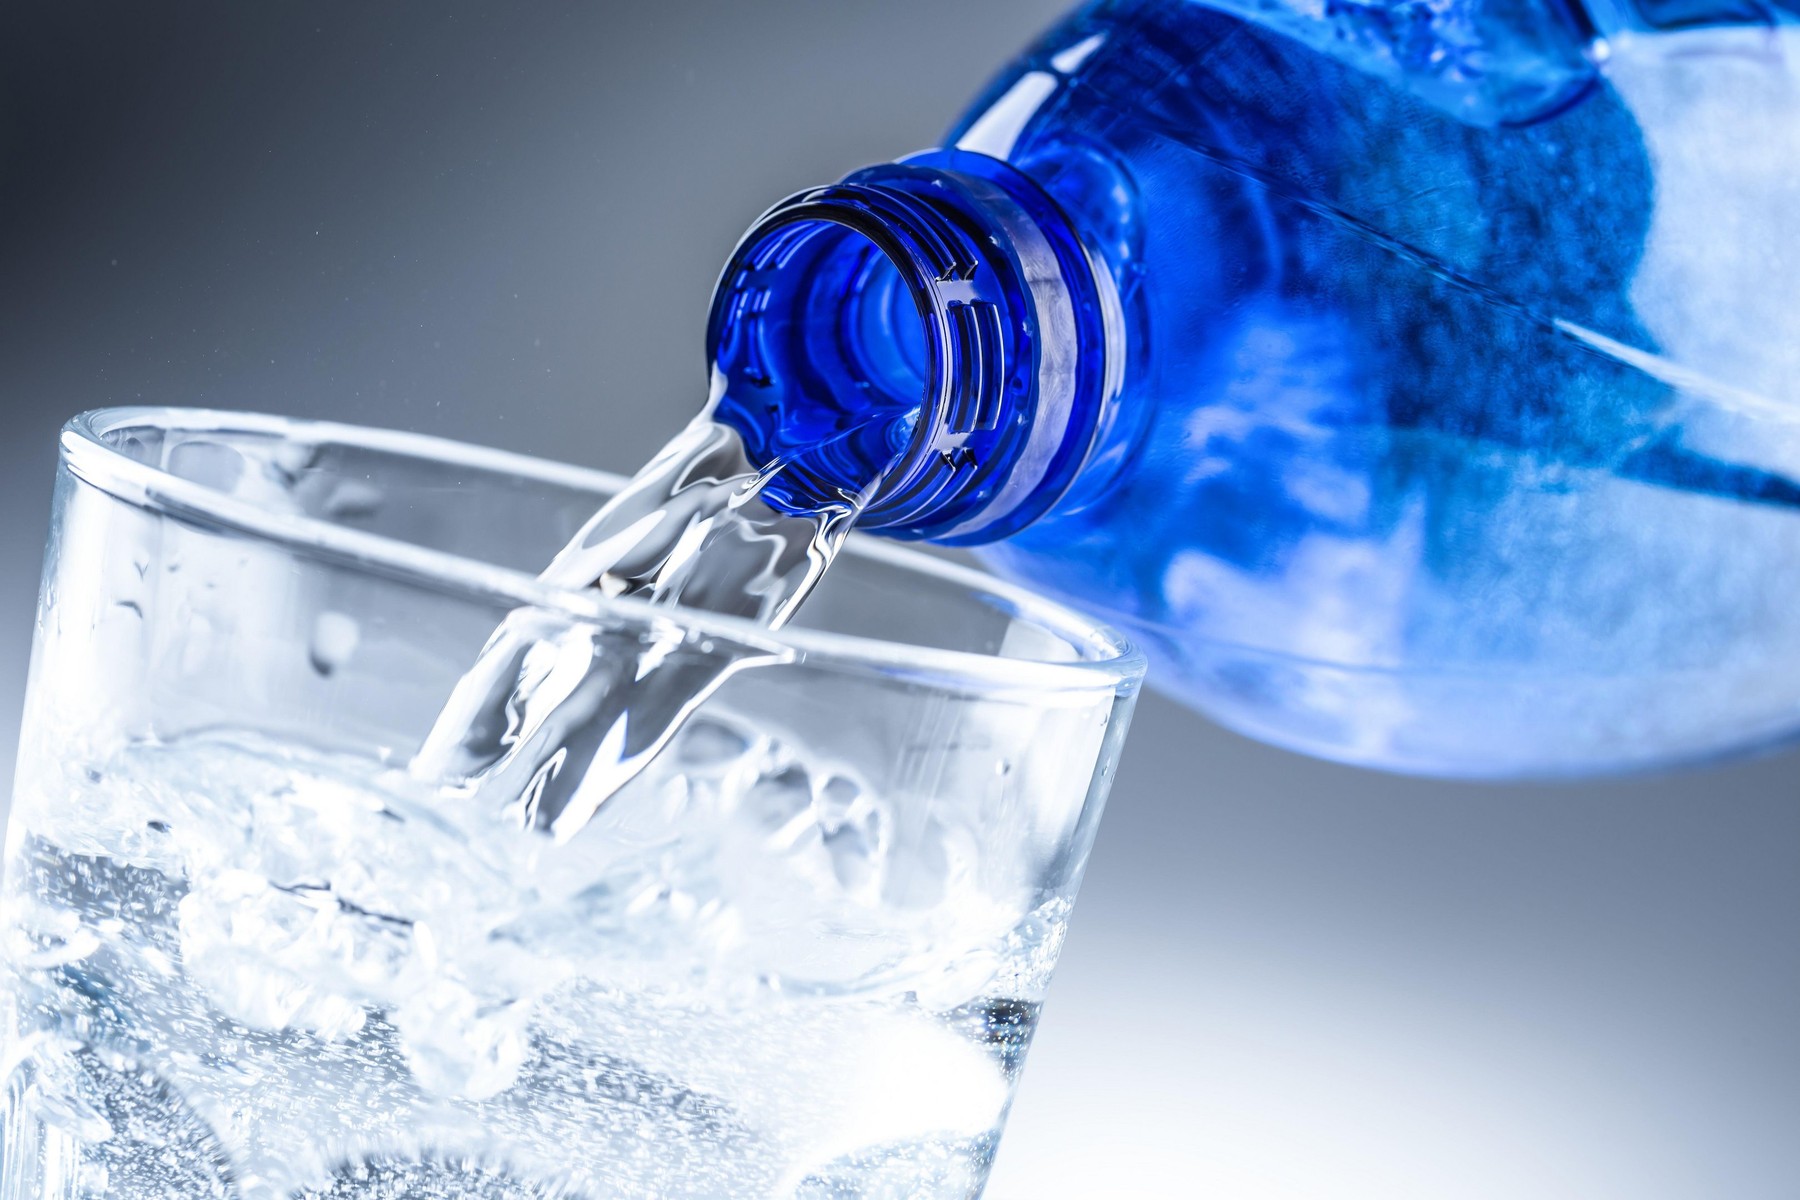 Pouring mineral water from blue bottle into clear glass on abstract grey background.,Image: 509975296, License: Royalty-free, Restrictions: , Model Release: no, Credit line: Weyo / Alamy / Alamy / Profimedia